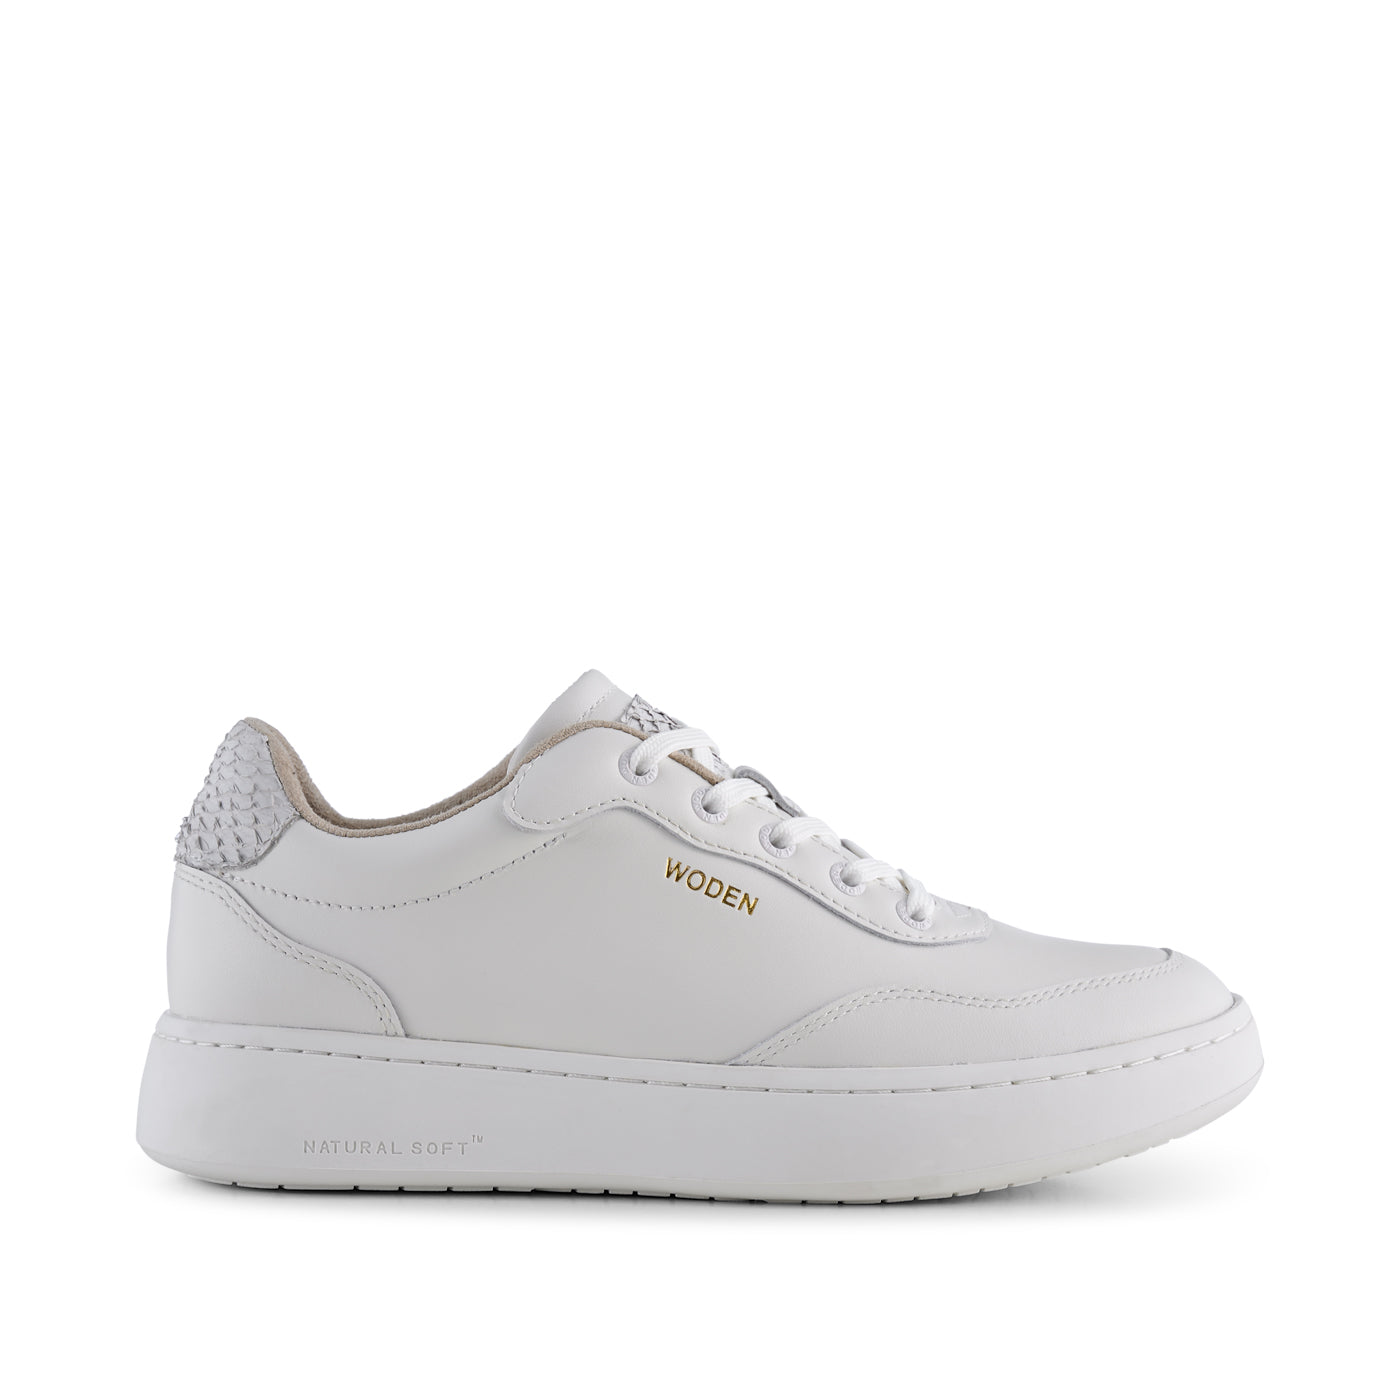 EVELYN LEATHER SNEAKERS (BLANC DE BLANC)